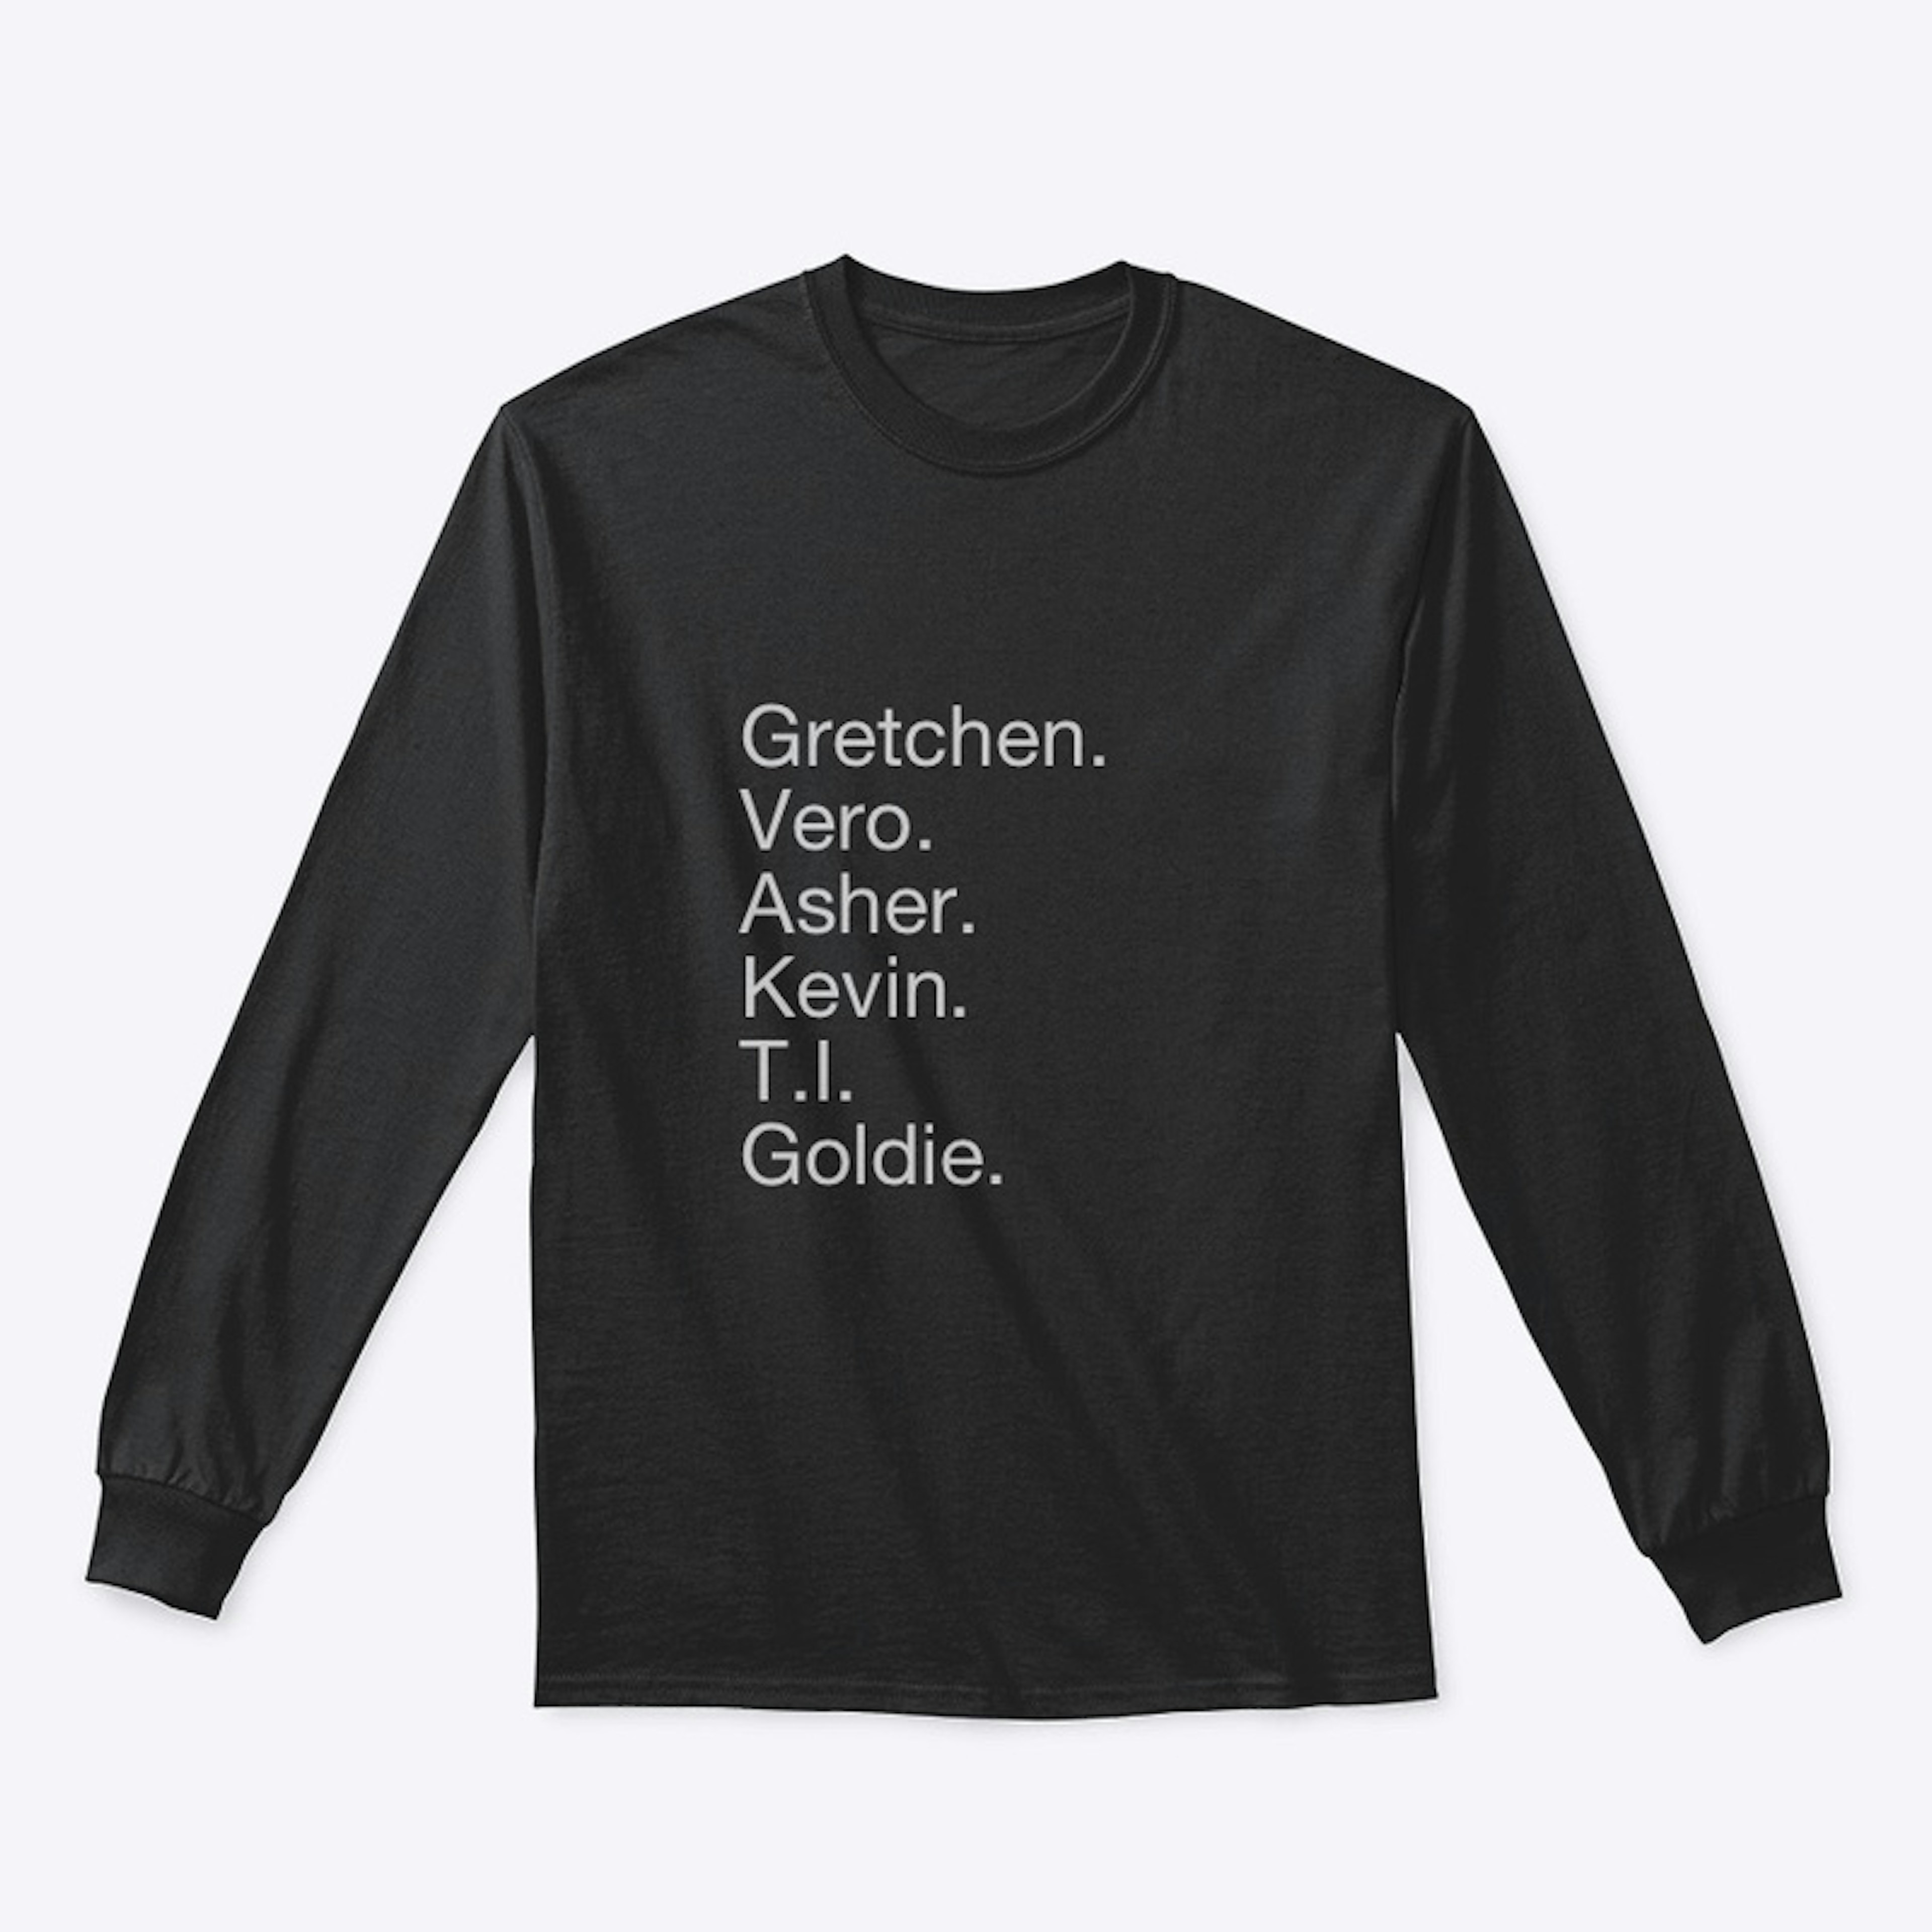 These Thems character names apparel